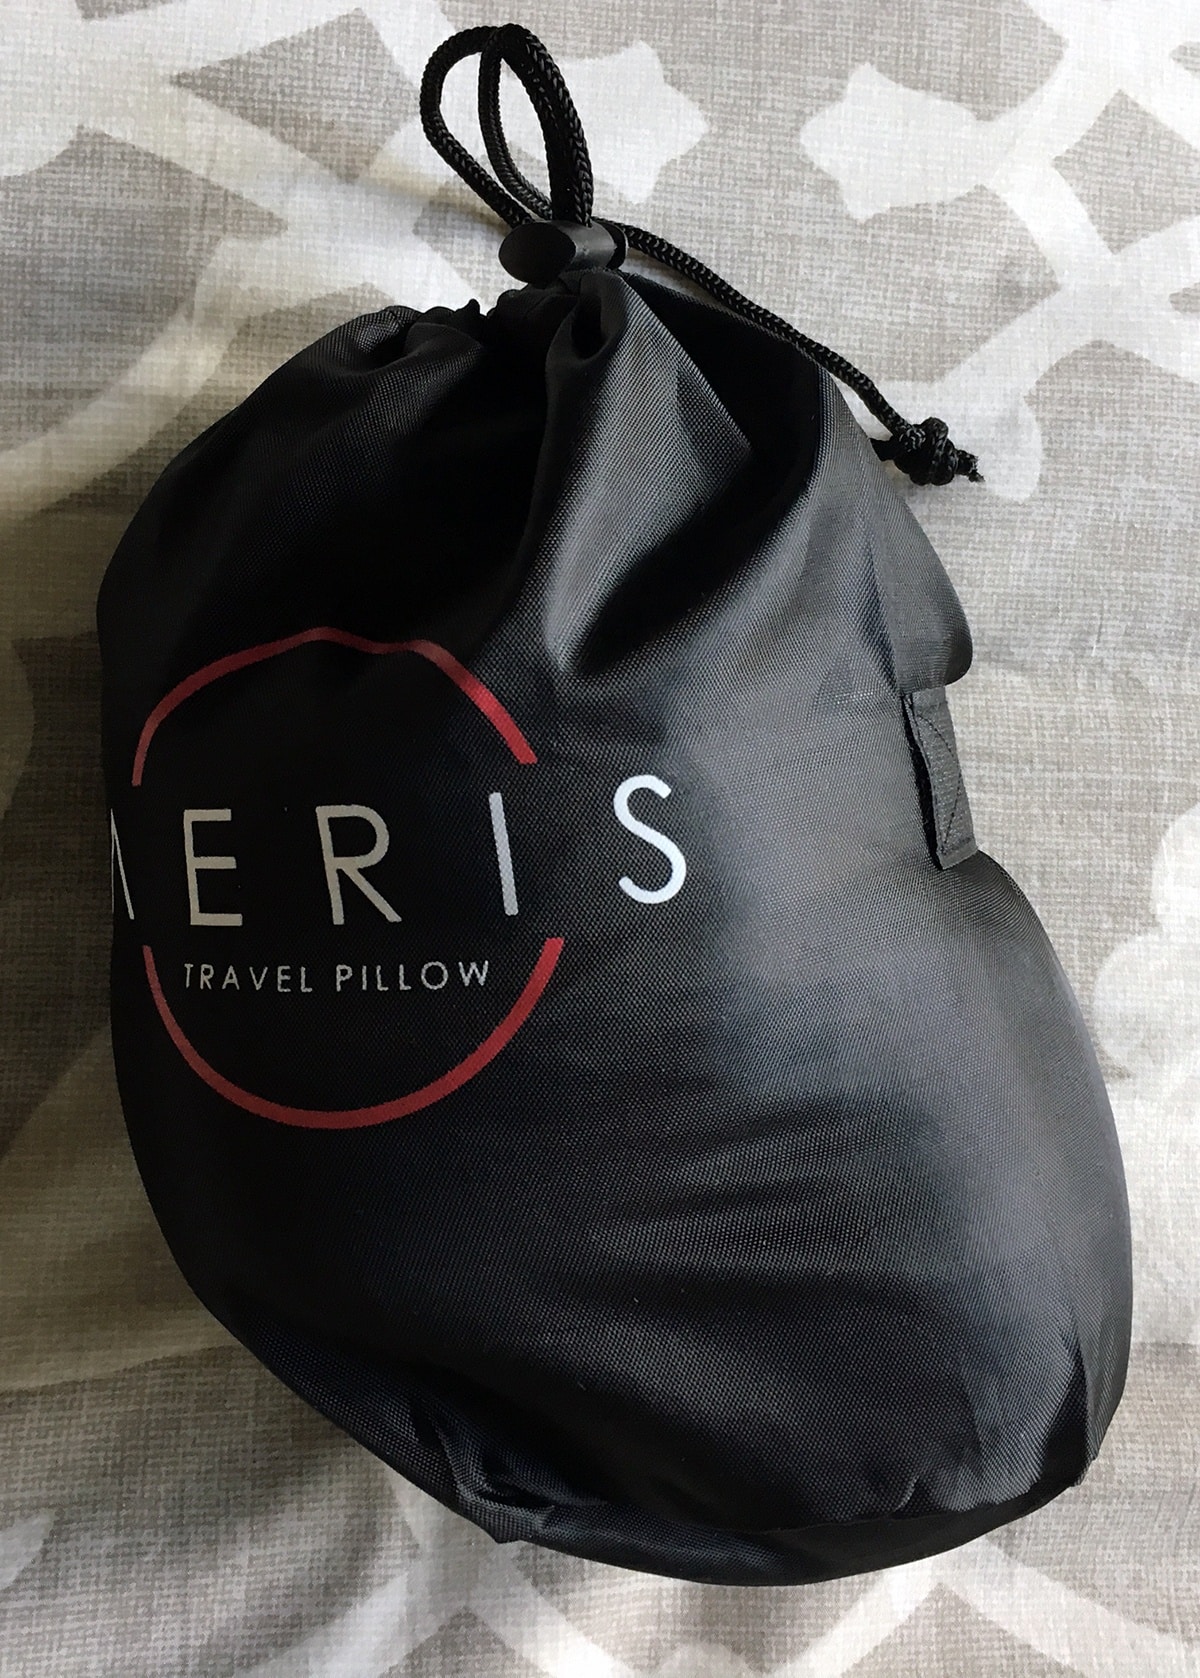 This is my review of the Aeris Memory Foam Travel Pillow. Although it was difficult to find information about the pillow - including how to care for it - I found the level of firmness and the soft fabric cover to be comfortable. I like that you can machine wash it and that you can compact it for easy travel. Some did not like how firm it was and complained of neck stiffness. It is more affordable than many travel pillows but not the least expensive neck pillow on the market.